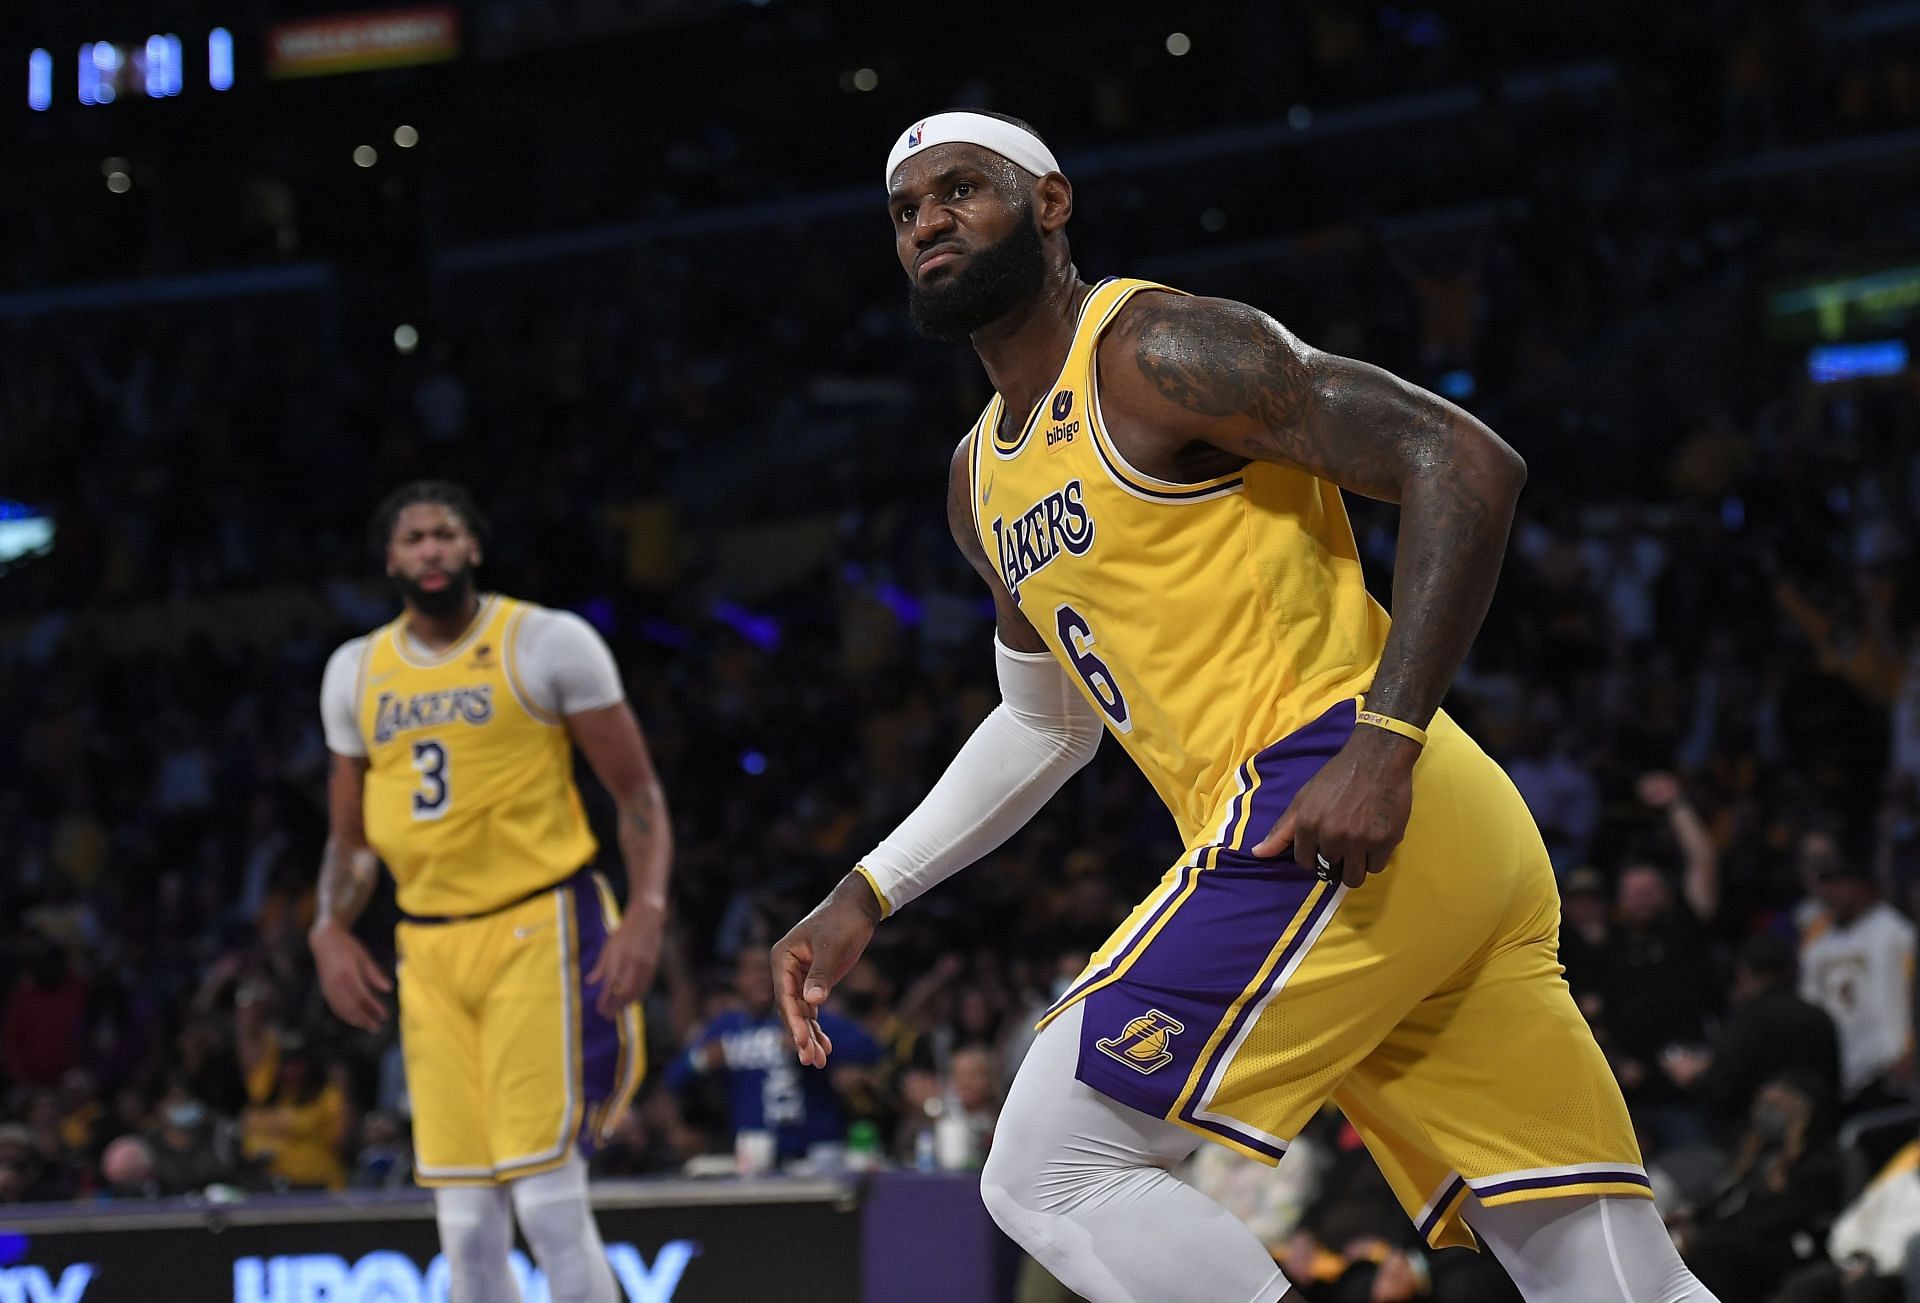 LeBron James reacts after scoring against the Golden State Warriors at Staples Center on October 19, 2021